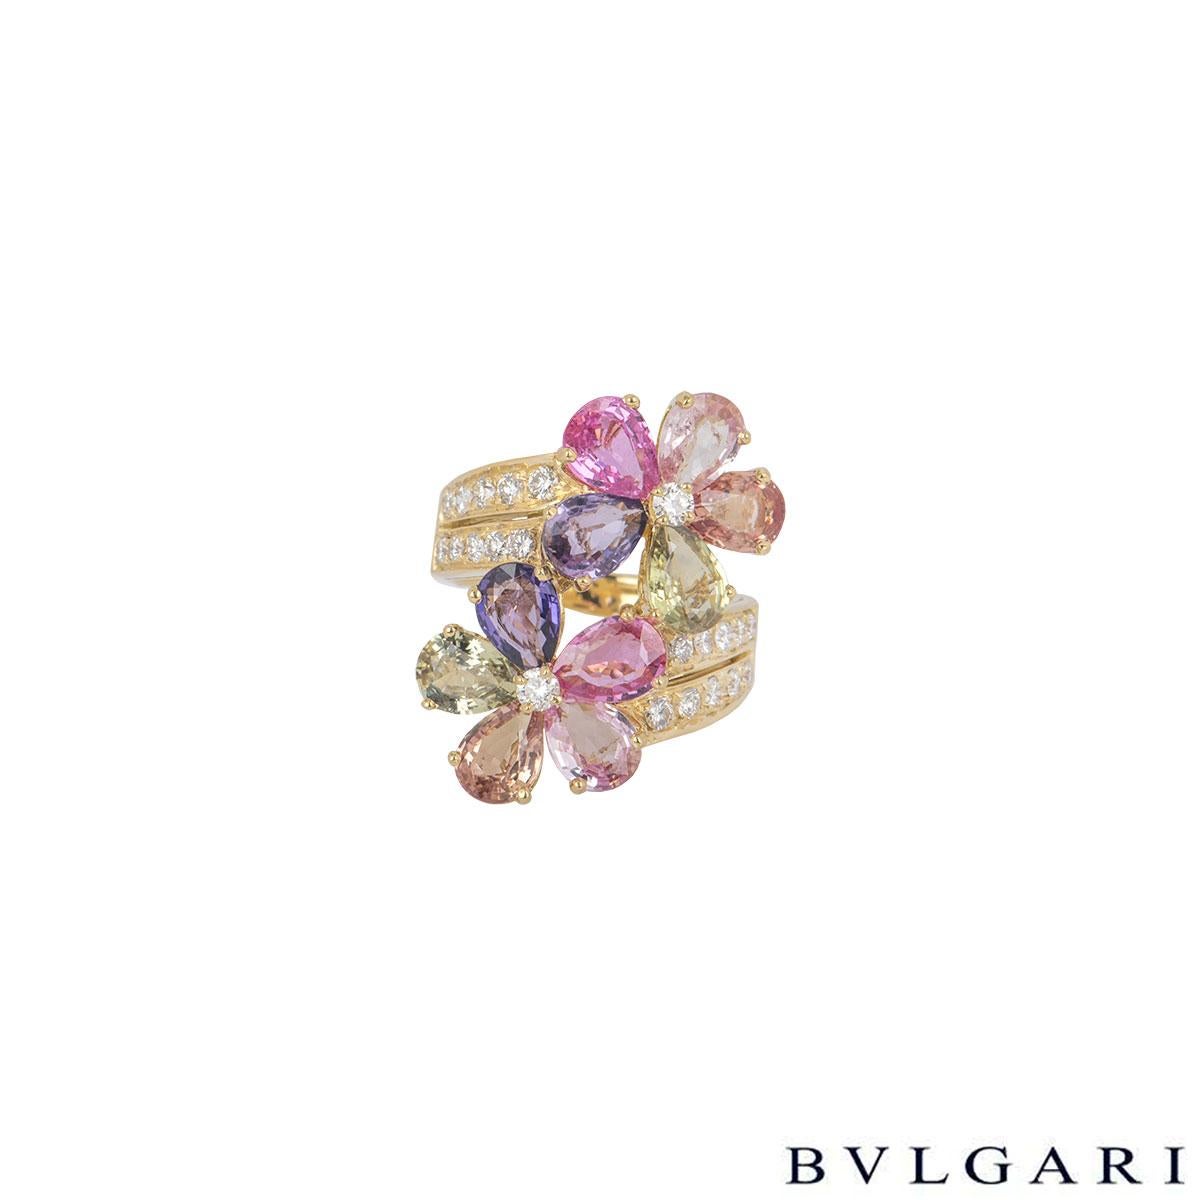 A beautiful 18k yellow gold, diamond and sapphire ring by Bvlgari from the Sapphire Flower collection. The ring comprises of 2 flower motifs composed of 10 fancy coloured pear cut sapphires as petals with 20 round brilliant cut diamonds in a pave